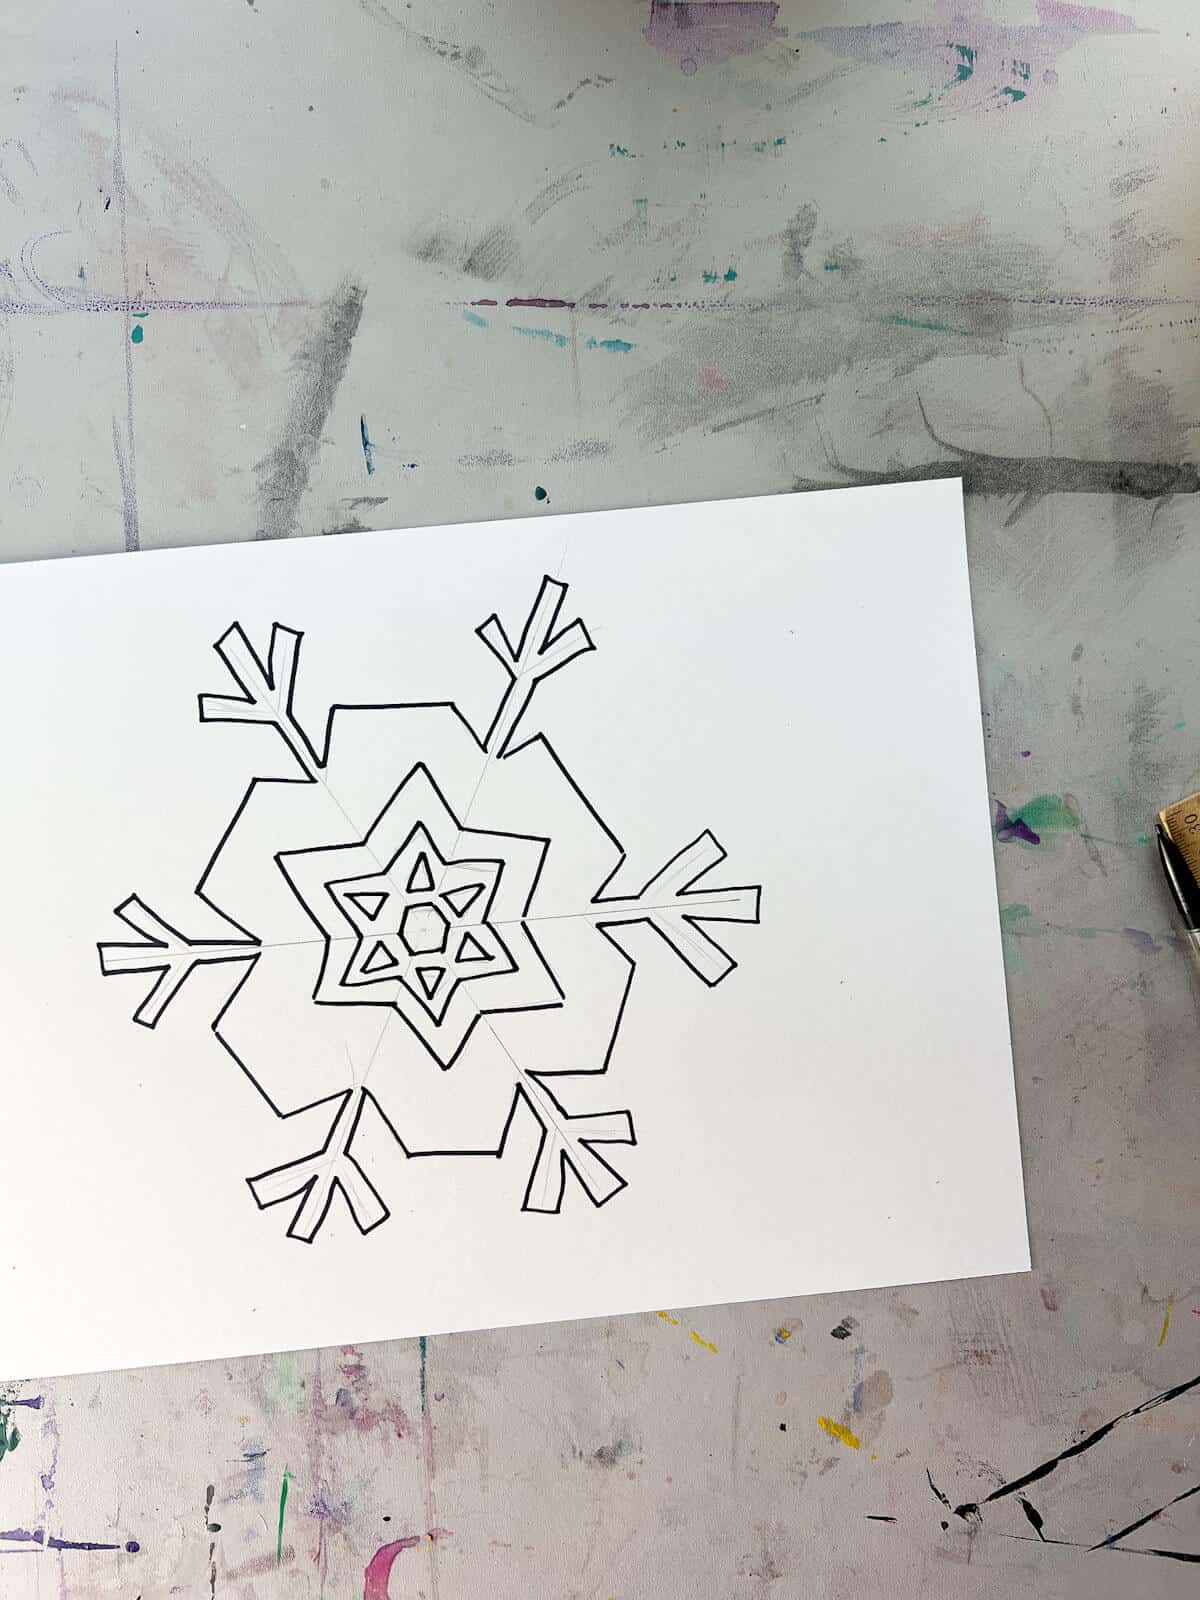 snowflake drawing outlined with black marker.